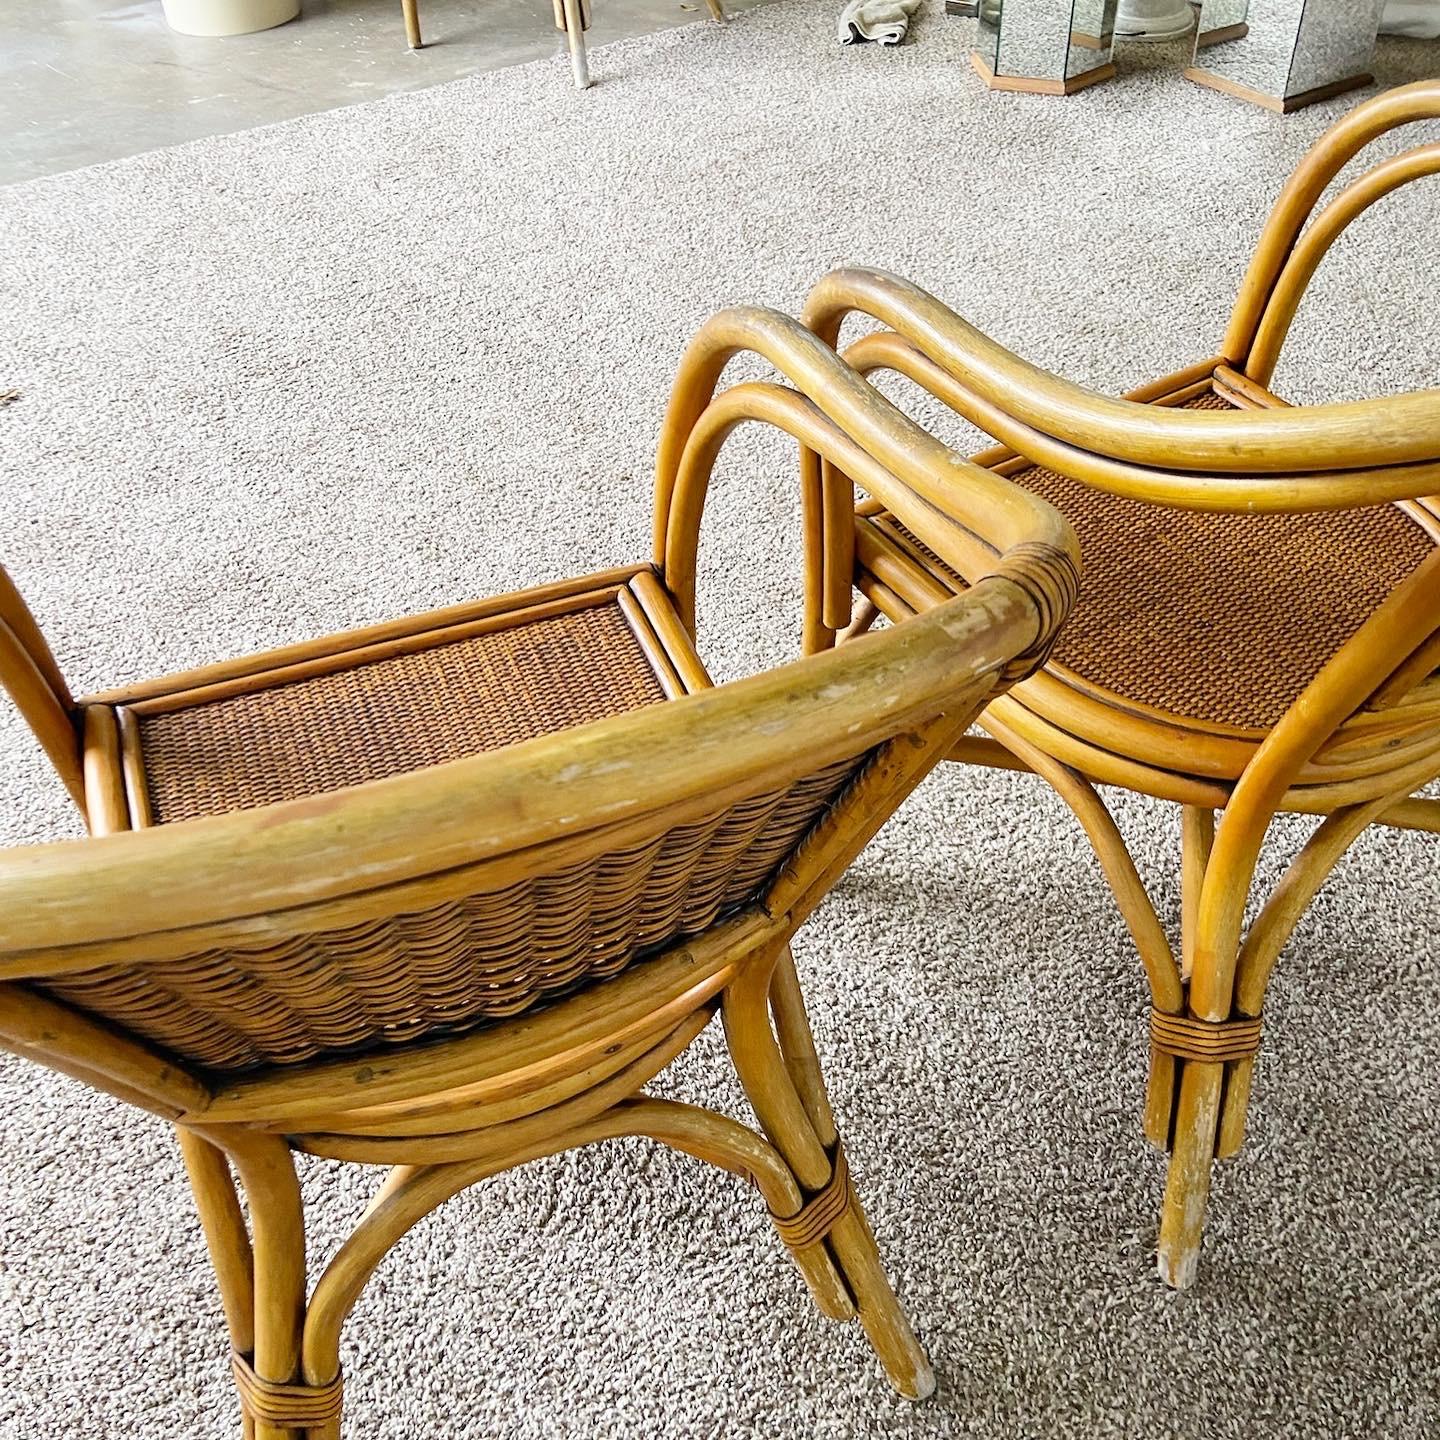 Dine in style with our set of four vintage Boho Chic Bamboo Rattan Arm Chairs. Each showcases a mature wicker backrest and seat for a distinct bohemian flair.

Features a set of four vintage Boho Chic design armchairs
Made with Bamboo and Rattan for